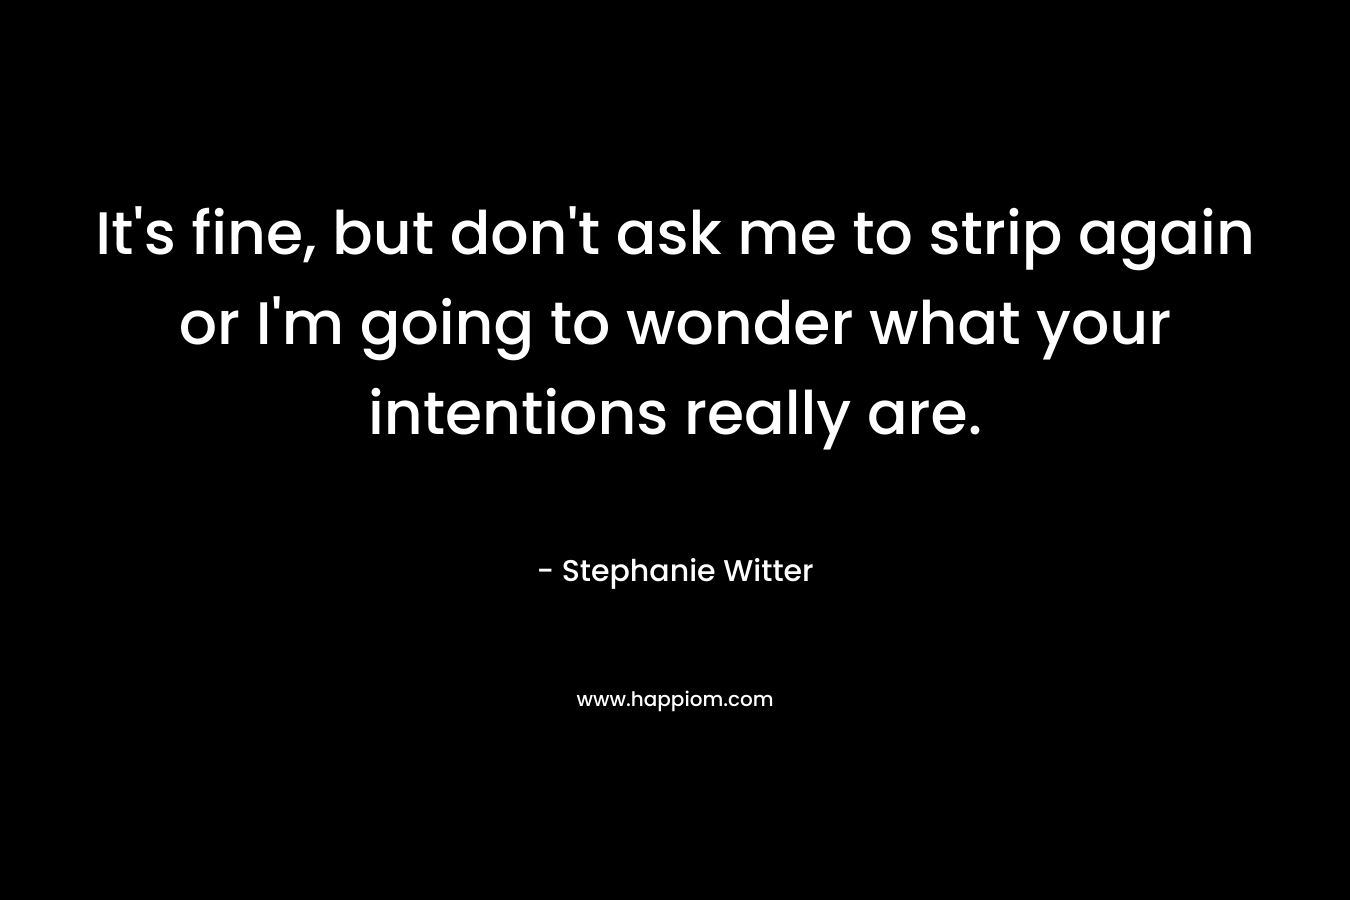 It’s fine, but don’t ask me to strip again or I’m going to wonder what your intentions really are. – Stephanie Witter